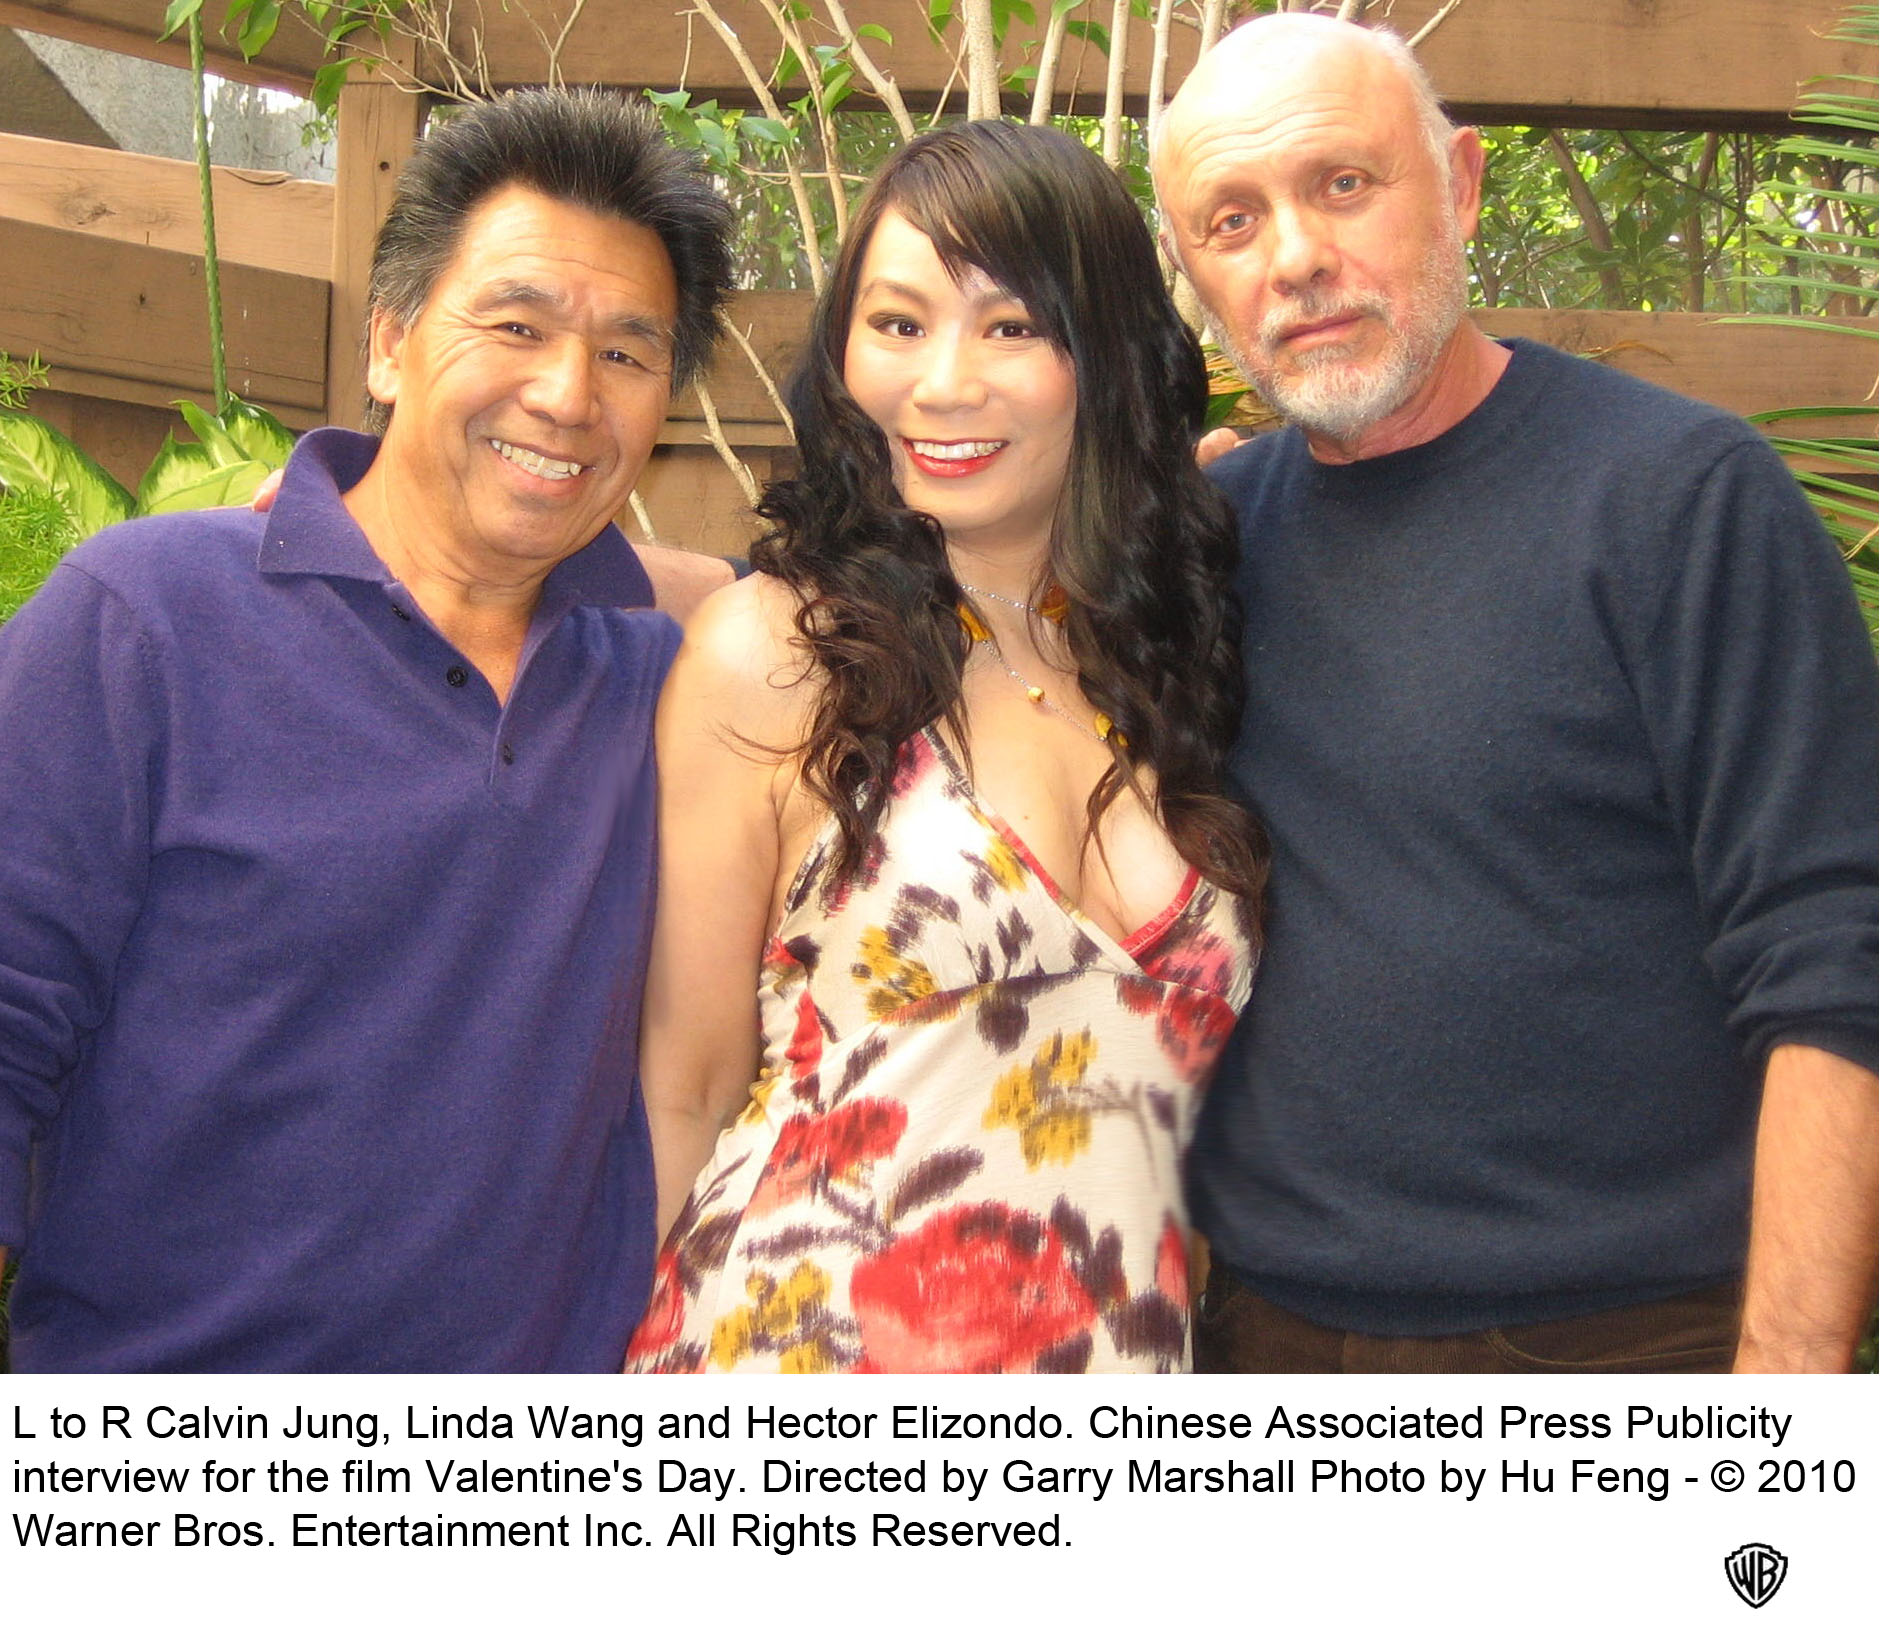 L to R Calvin Jung, Linda Wang and Hector Elizondo. Chinese Associated Press Publicity interview for the film Valentine's Day. Directed by Garry Marshall.